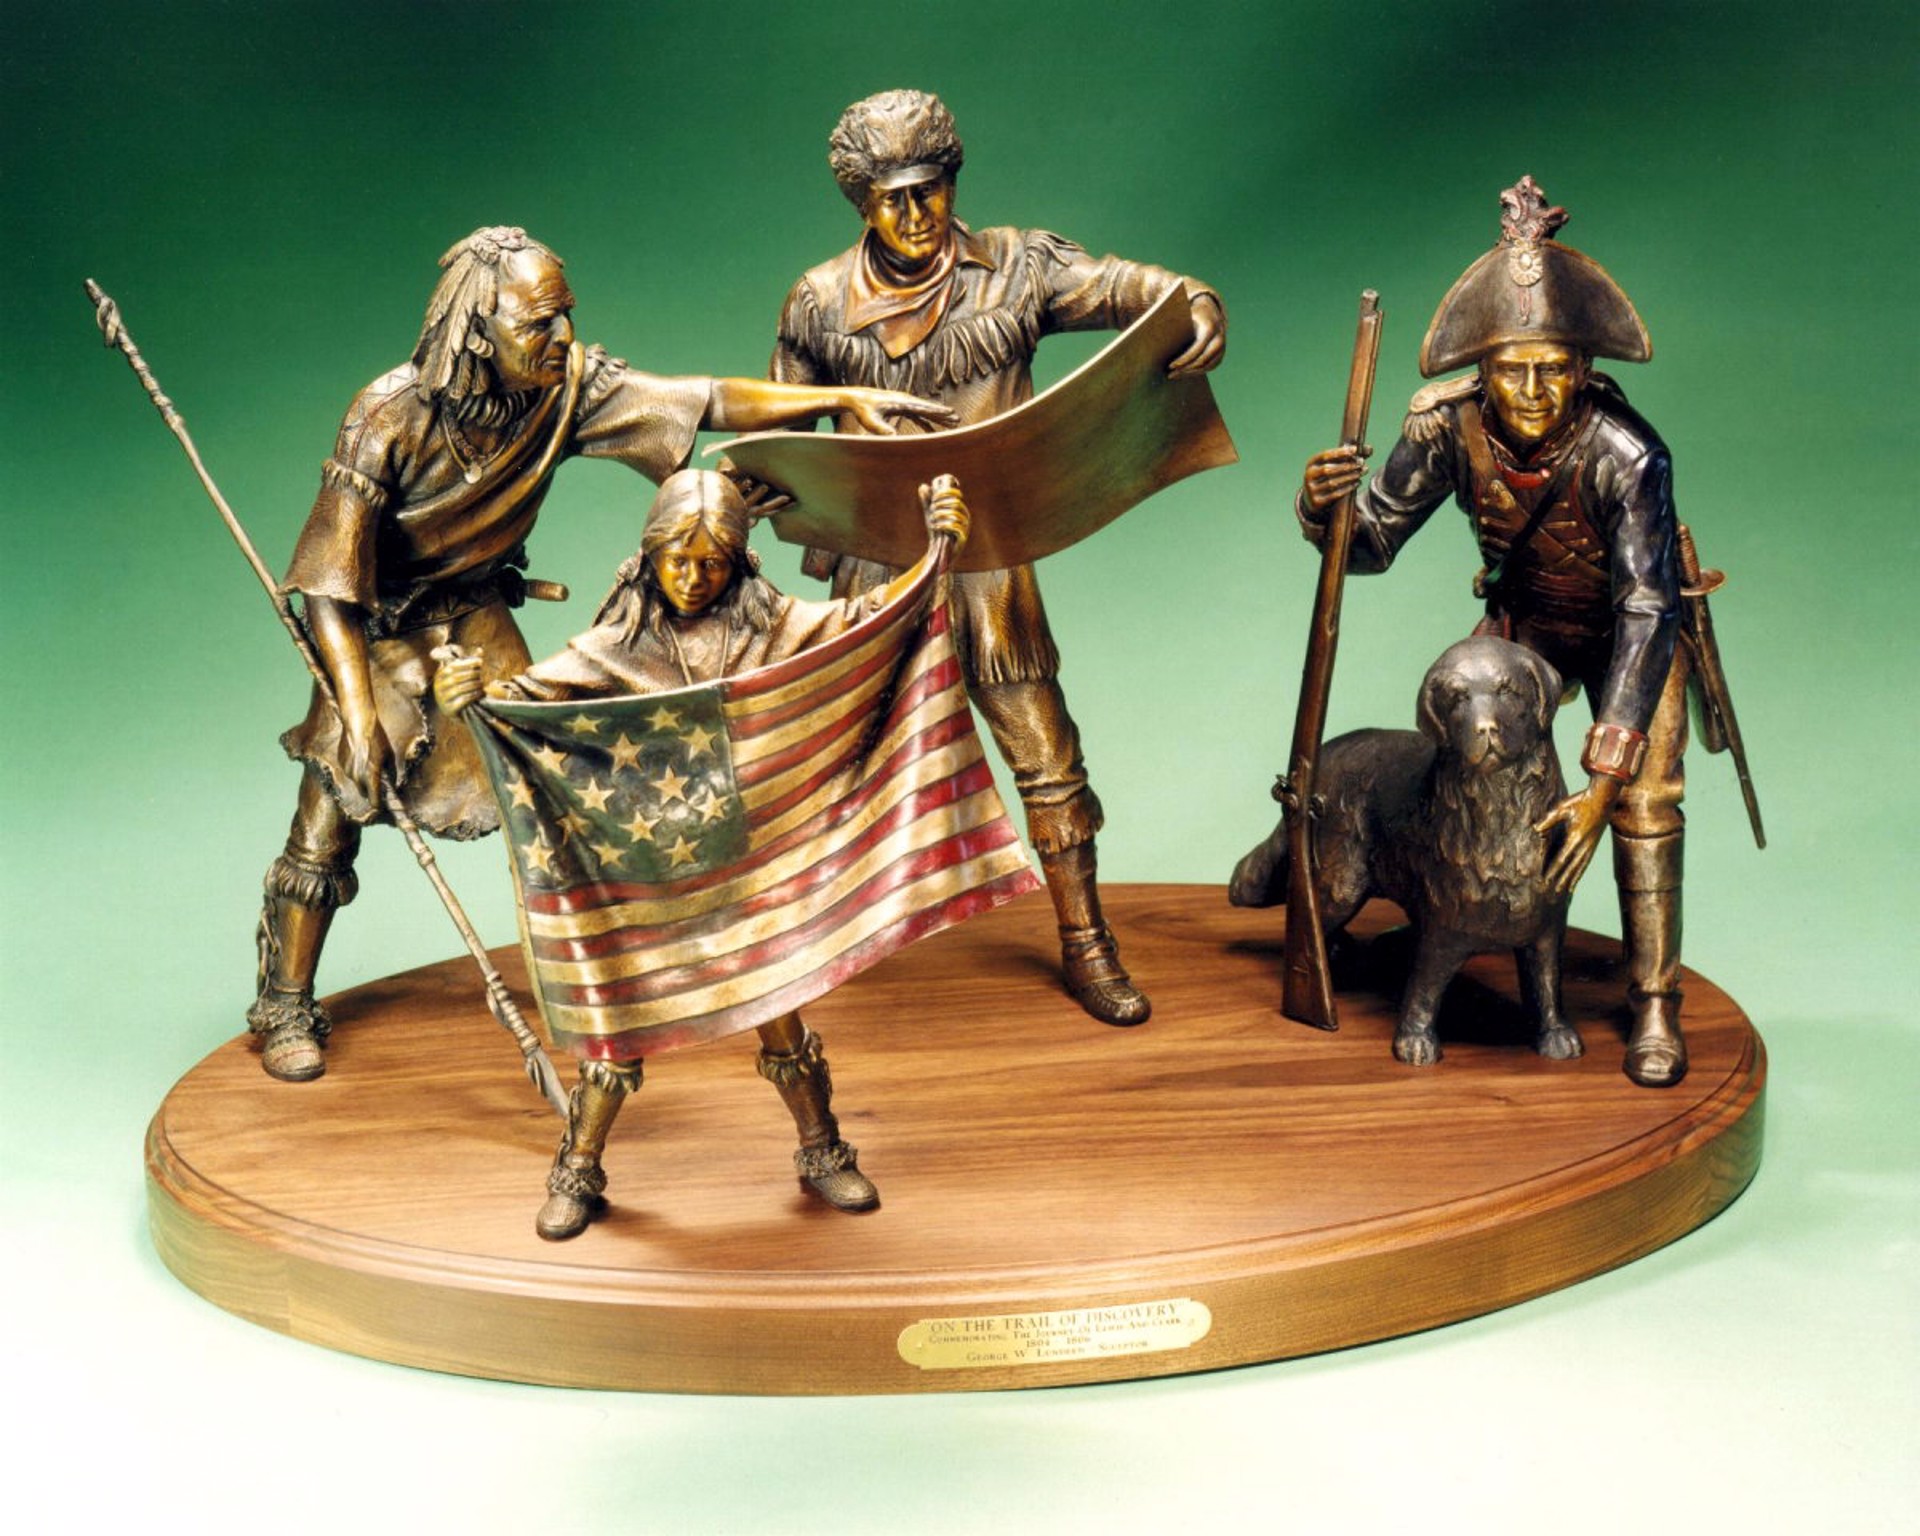 On the Trail of Discovery by George Lundeen